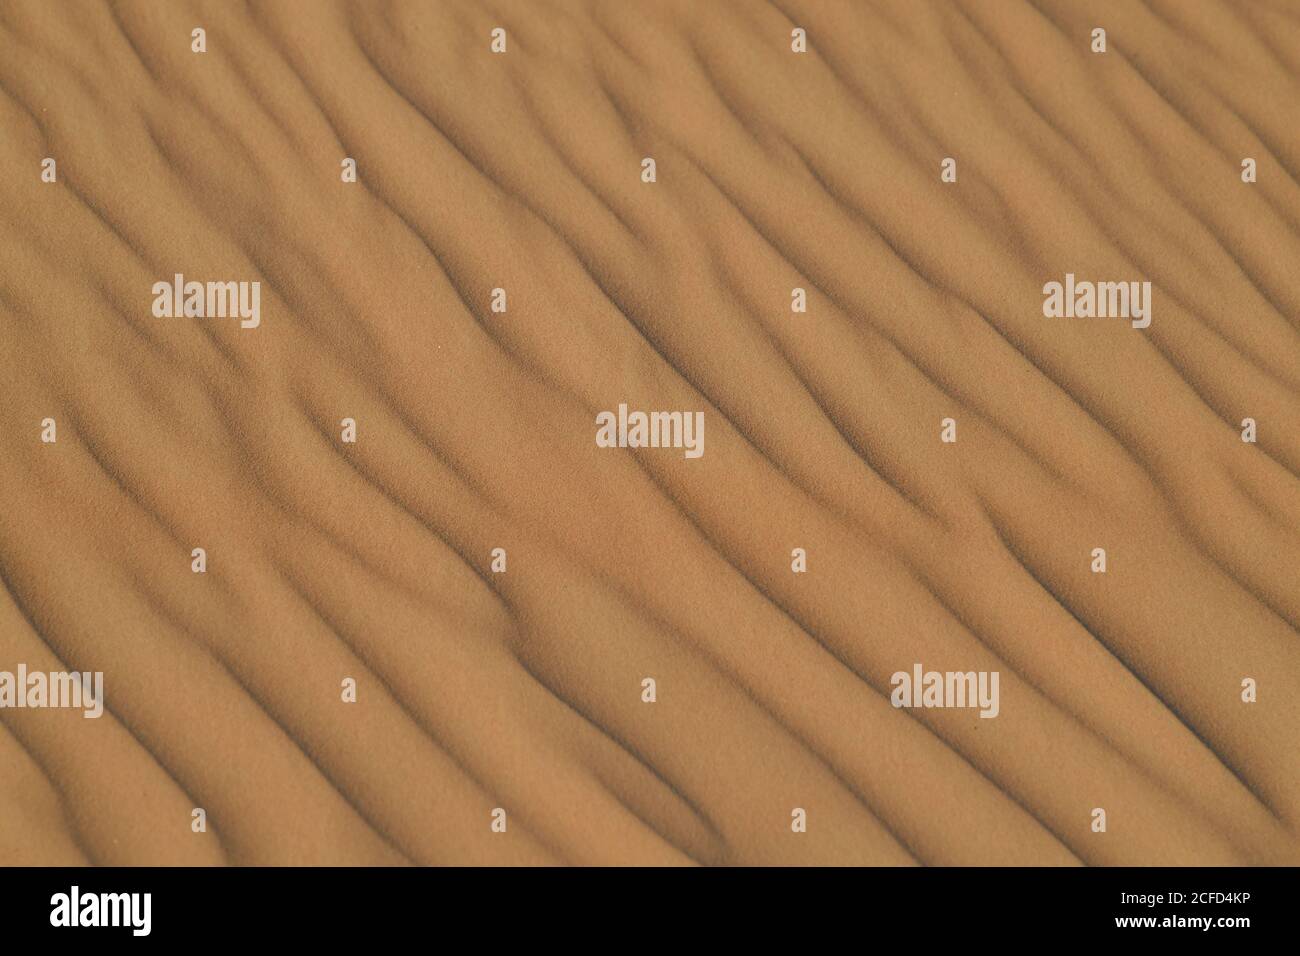 Arabian Peninsula desert sand dunes, being contoured into different shapes & sizes from the shifting winds of the desert environment landscapes. Stock Photo